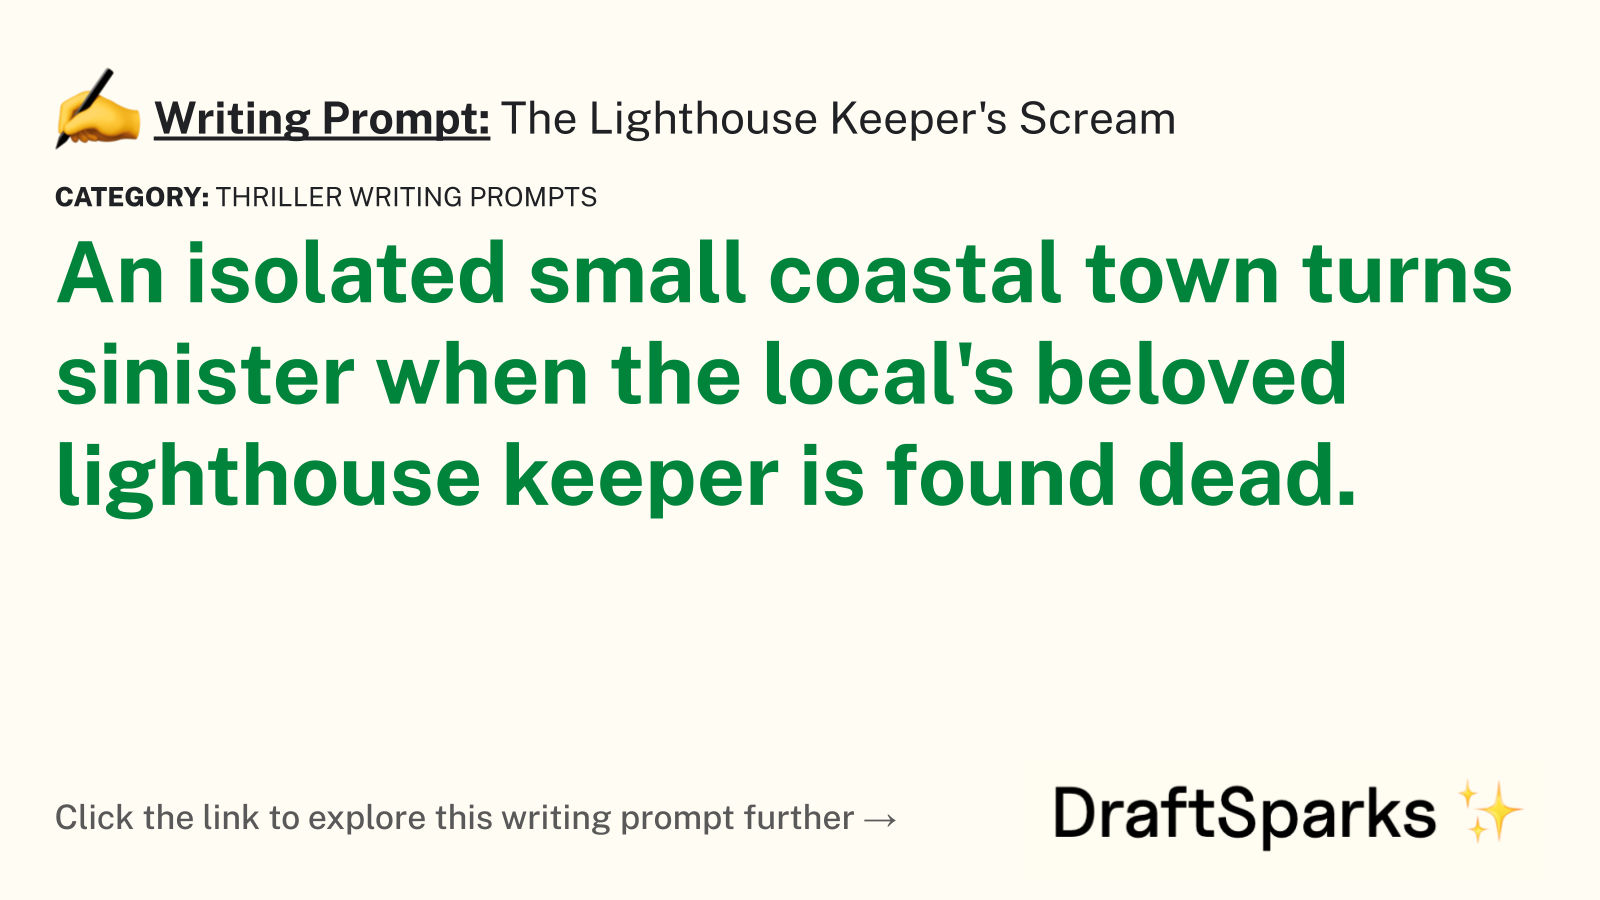 The Lighthouse Keeper’s Scream